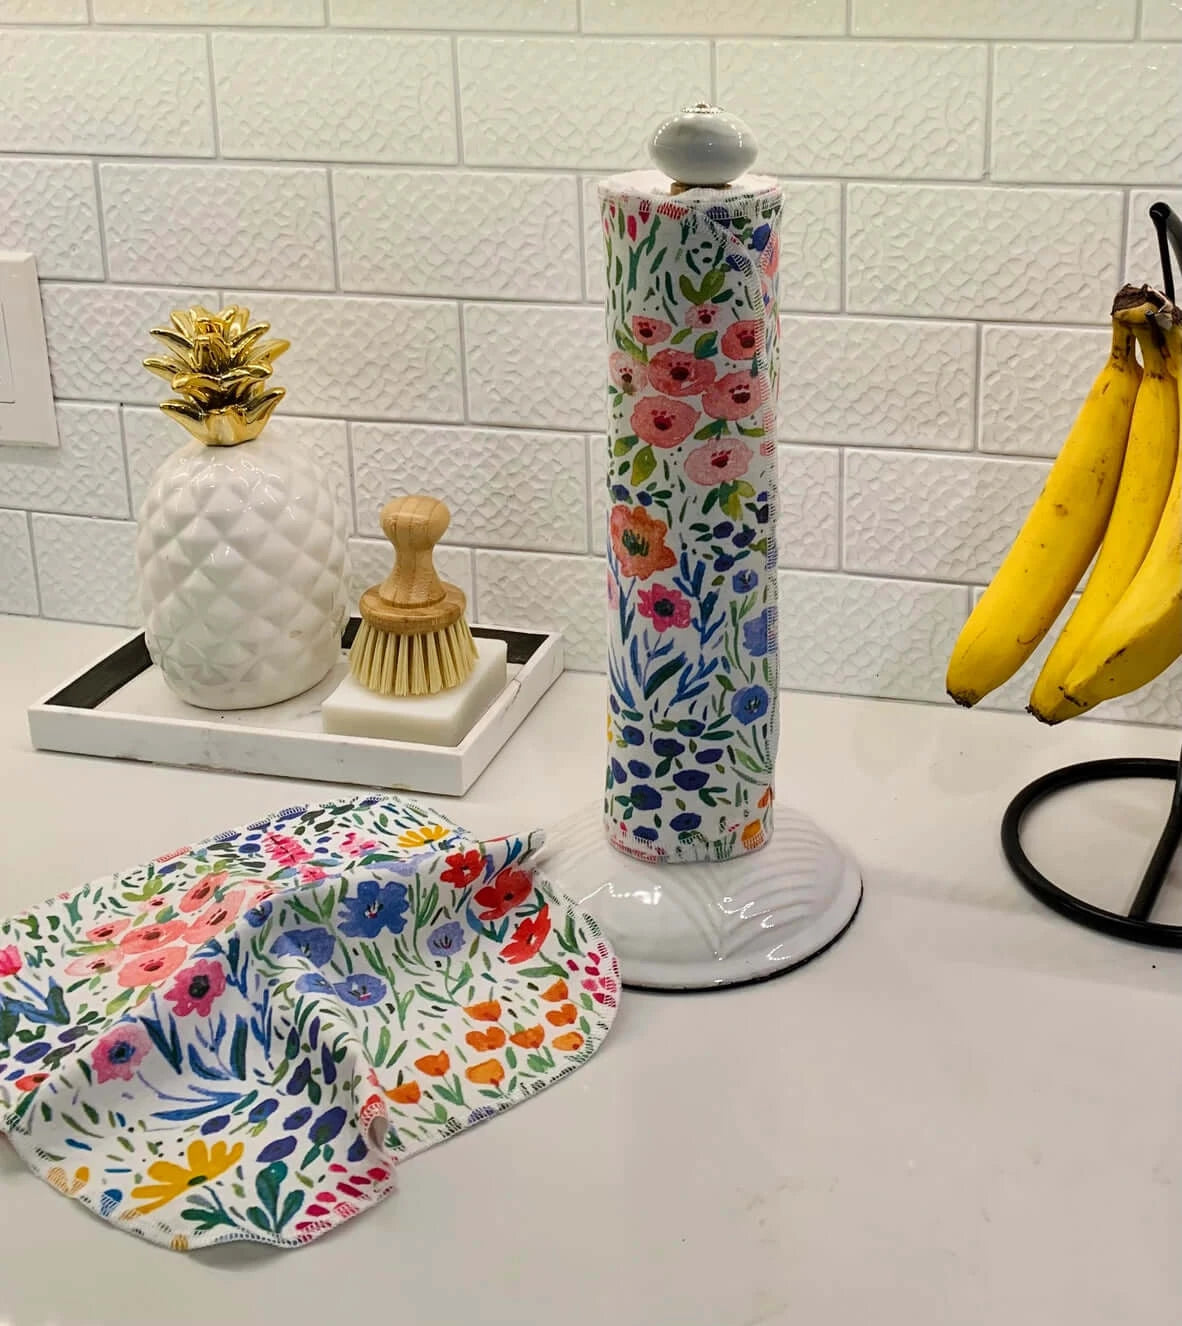 nonpaper towels with flower design on a paper towel holder, sitting next to bananas and a soap dish 